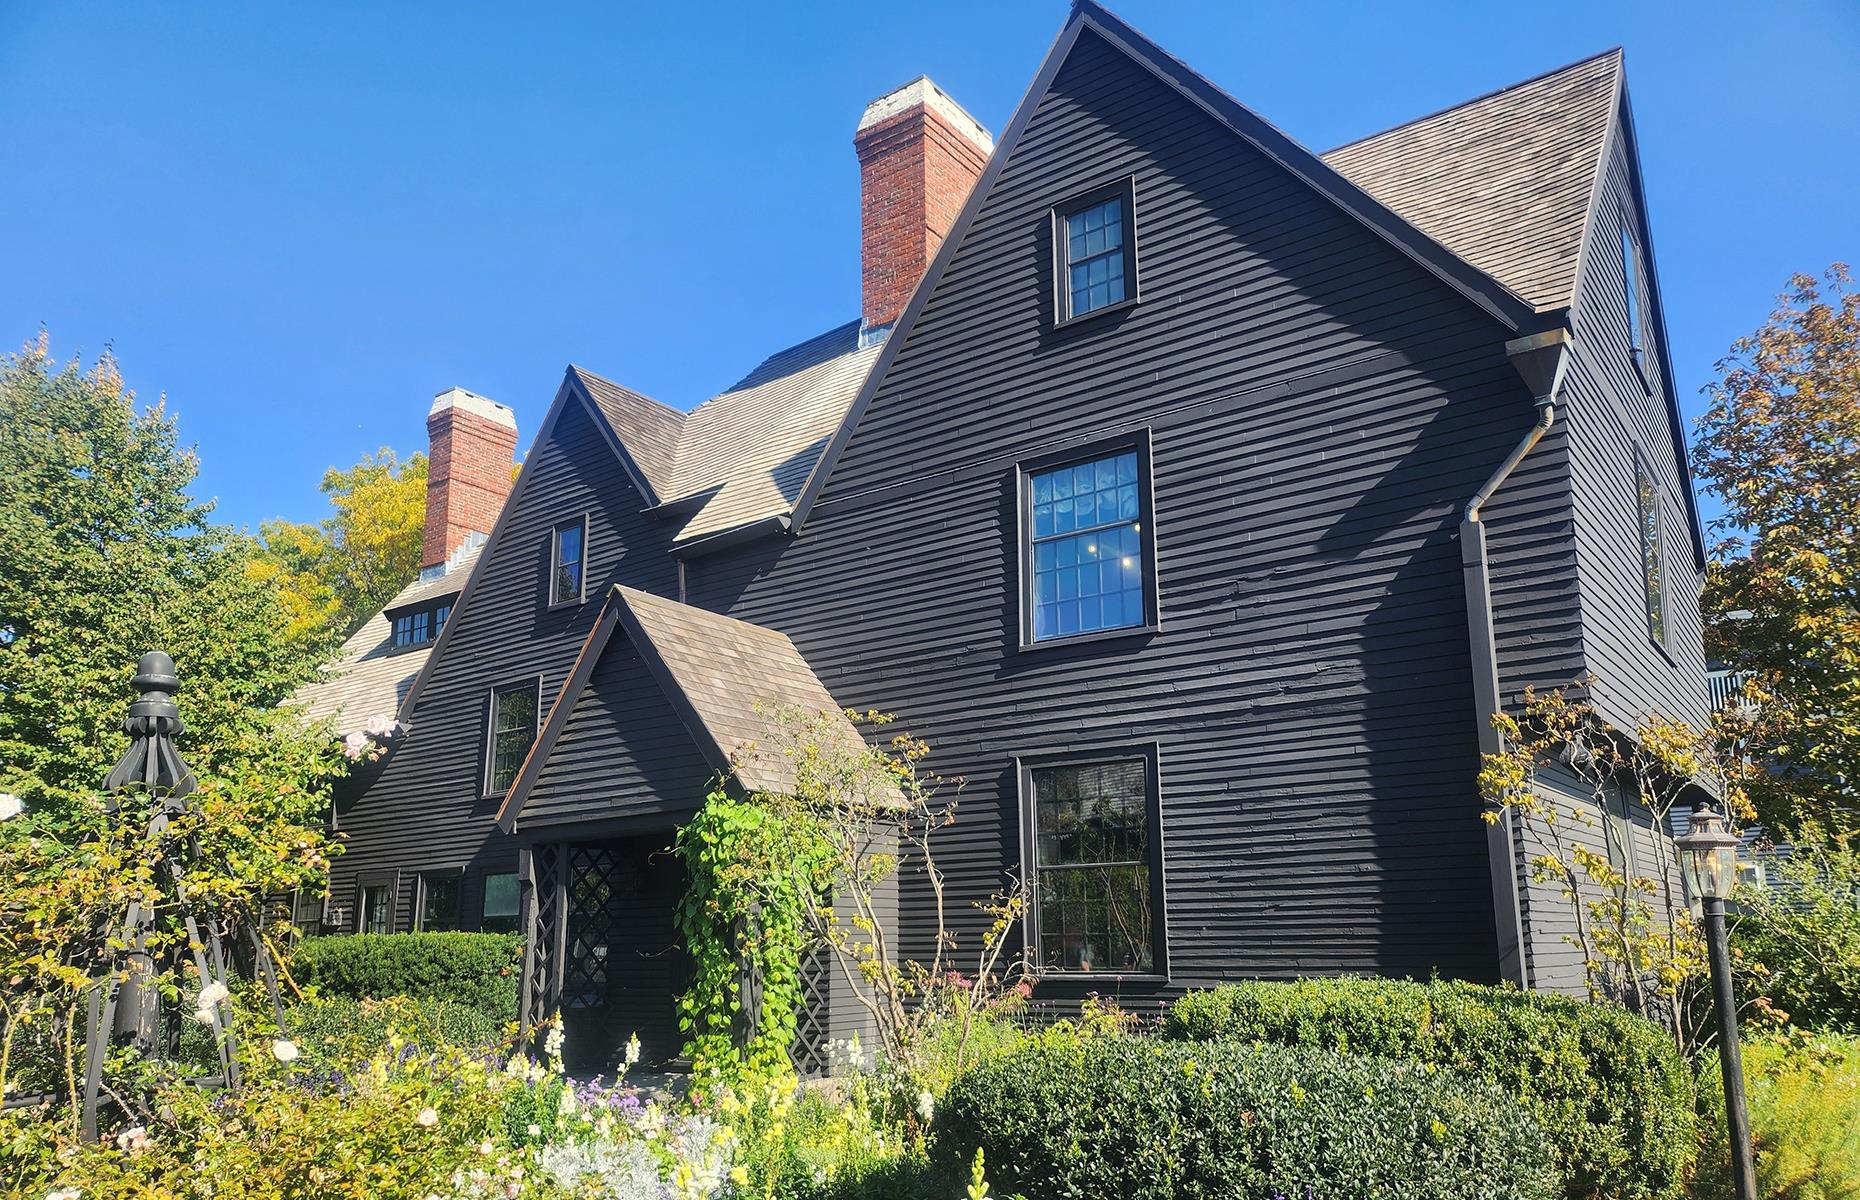 This historic 17th-century mansion in Salem was made famous by Nathaniel Hawthorne's novel of the same name, published in 1851. Named so for the seven gables that adorn the house, the building has an interesting history harking all the way back to the Salem Witch Trials of the 1690s. Today, it's a popular tourist attraction and is even said to be haunted.